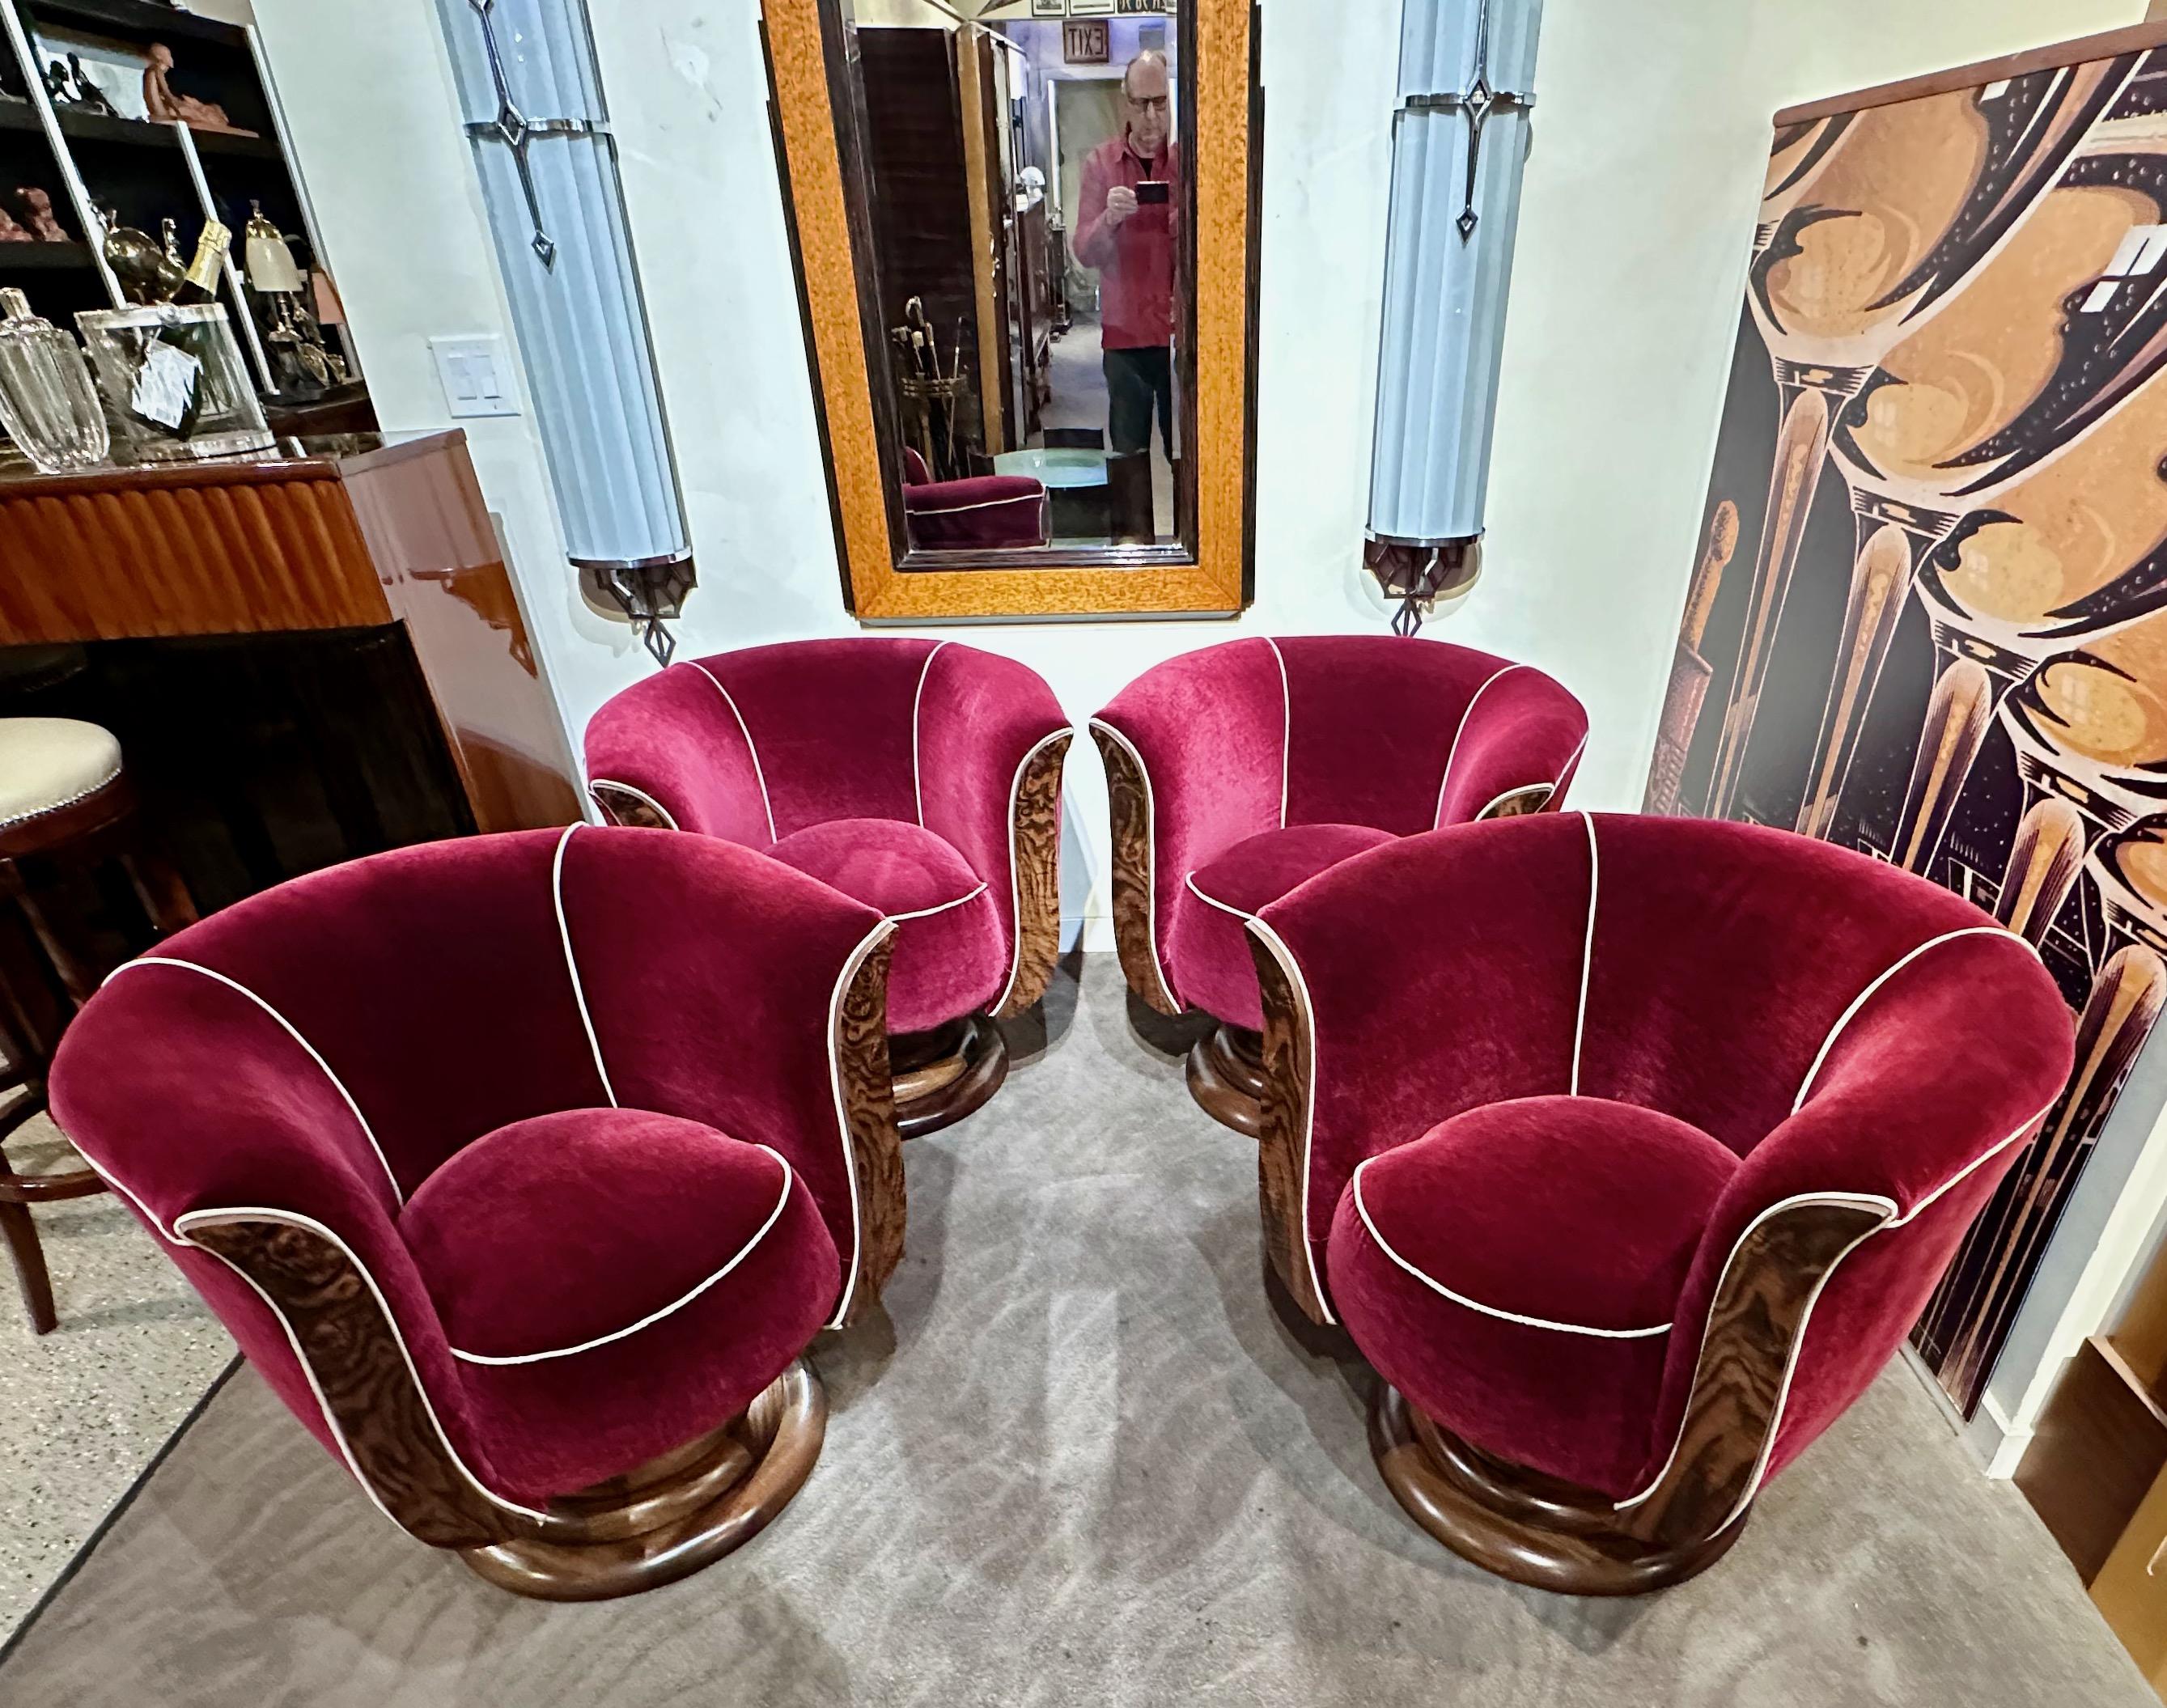 Art Deco Swivel Club Chairs are back. This is a chair we’ve been promoting for years. Originally, we bought them in France (the story is that they came out of a hotel). We made some changes, and adding the swivel to the base helped make them a